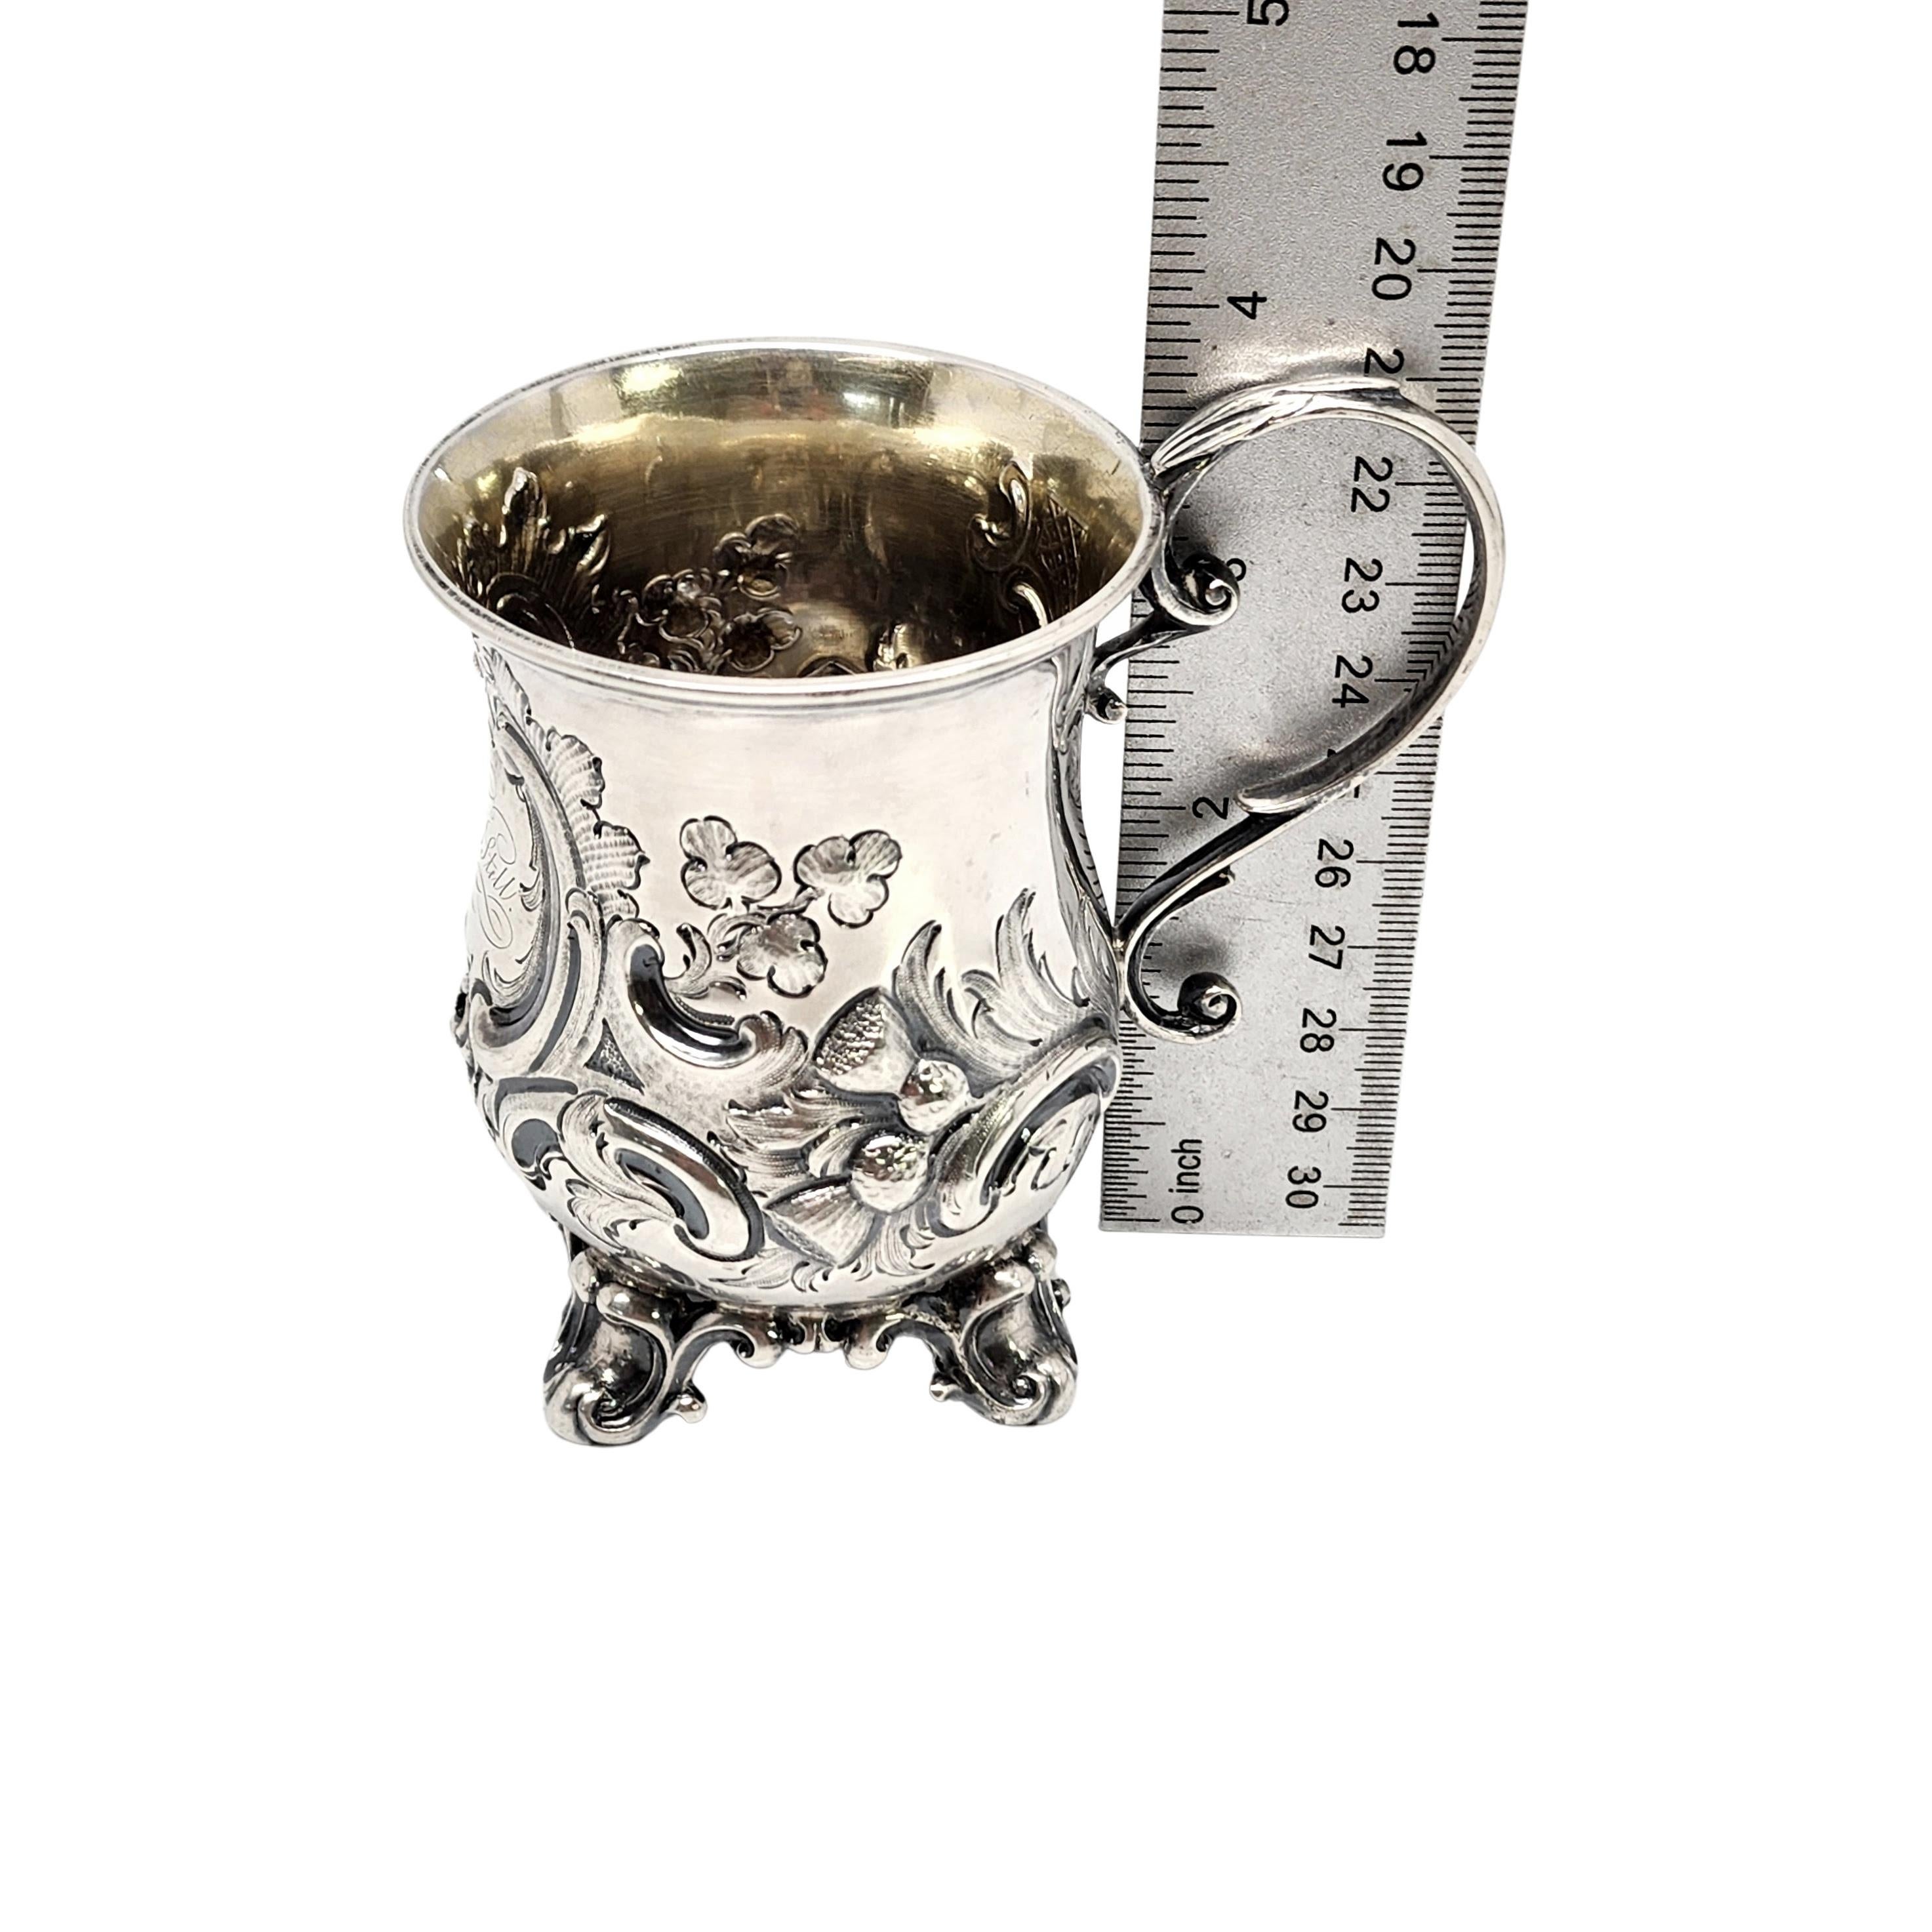 Antique George Angell London England Sterling Silver Footed Cup with Monogram For Sale 7